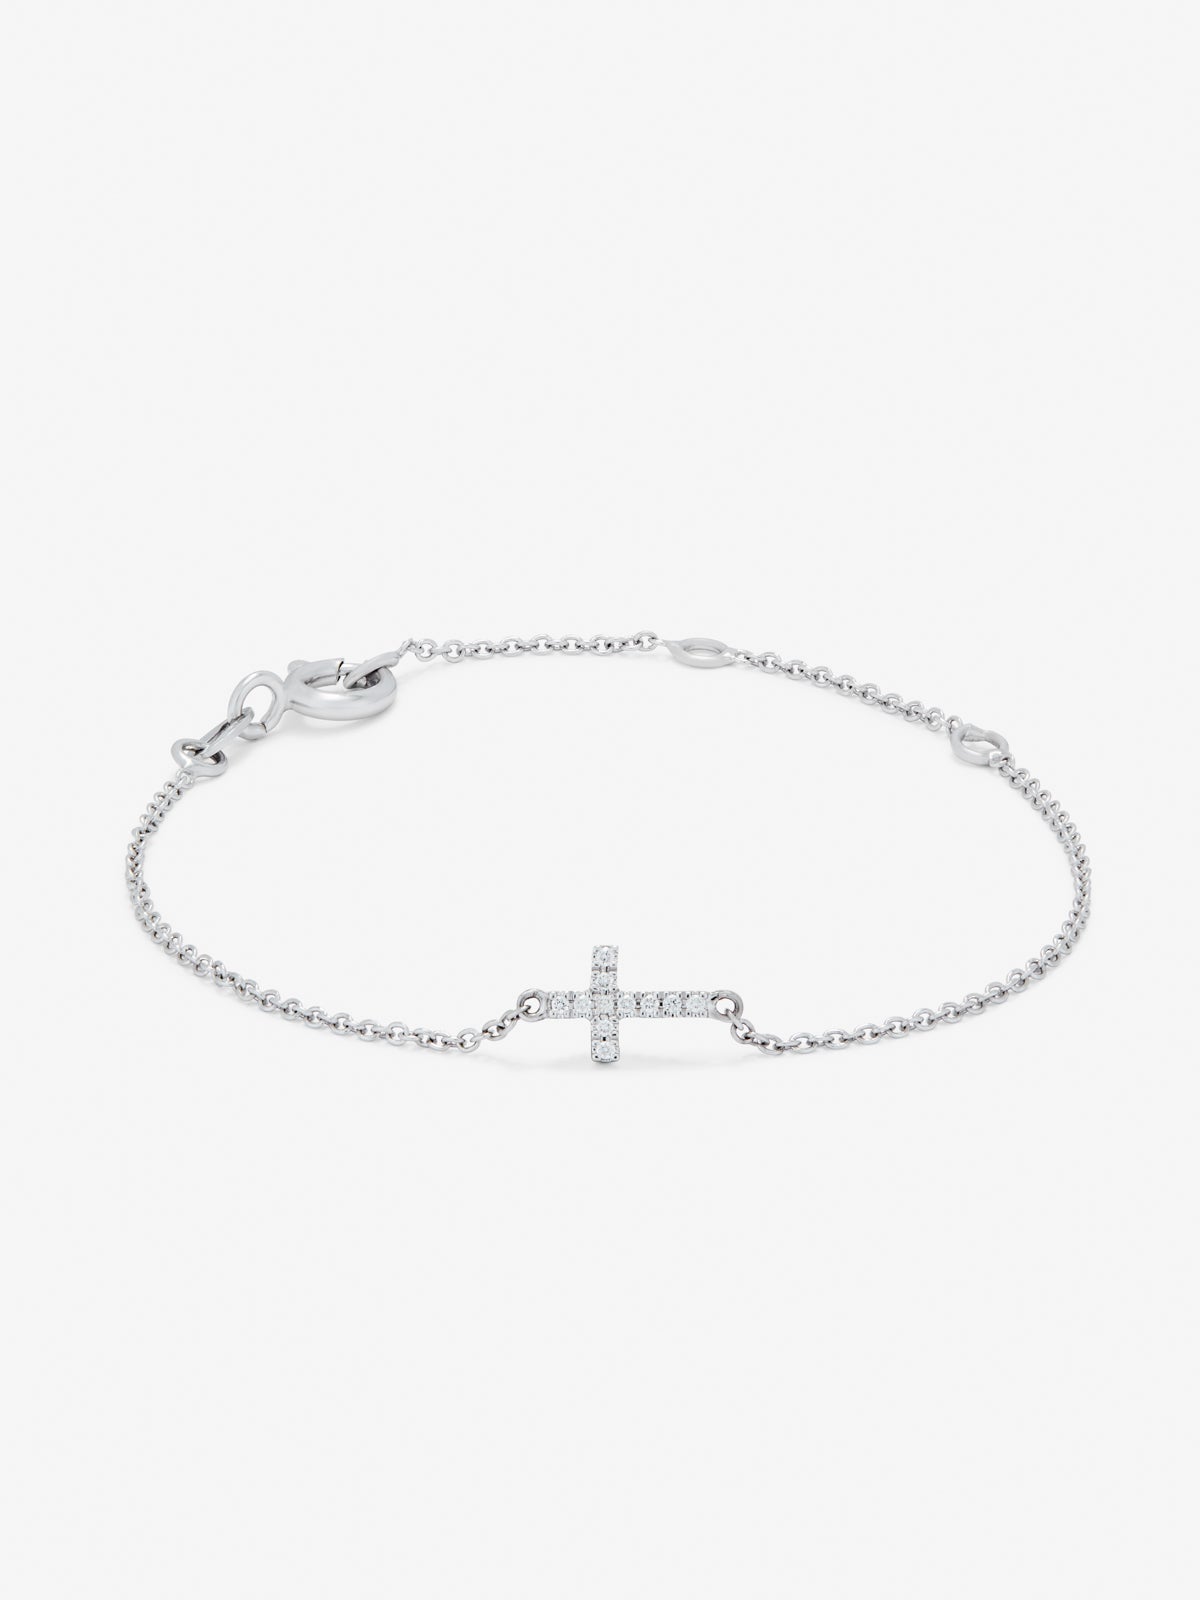 18K white gold bracelet with 11 brilliant-cut diamonds with a total of 0.04 cts and cross